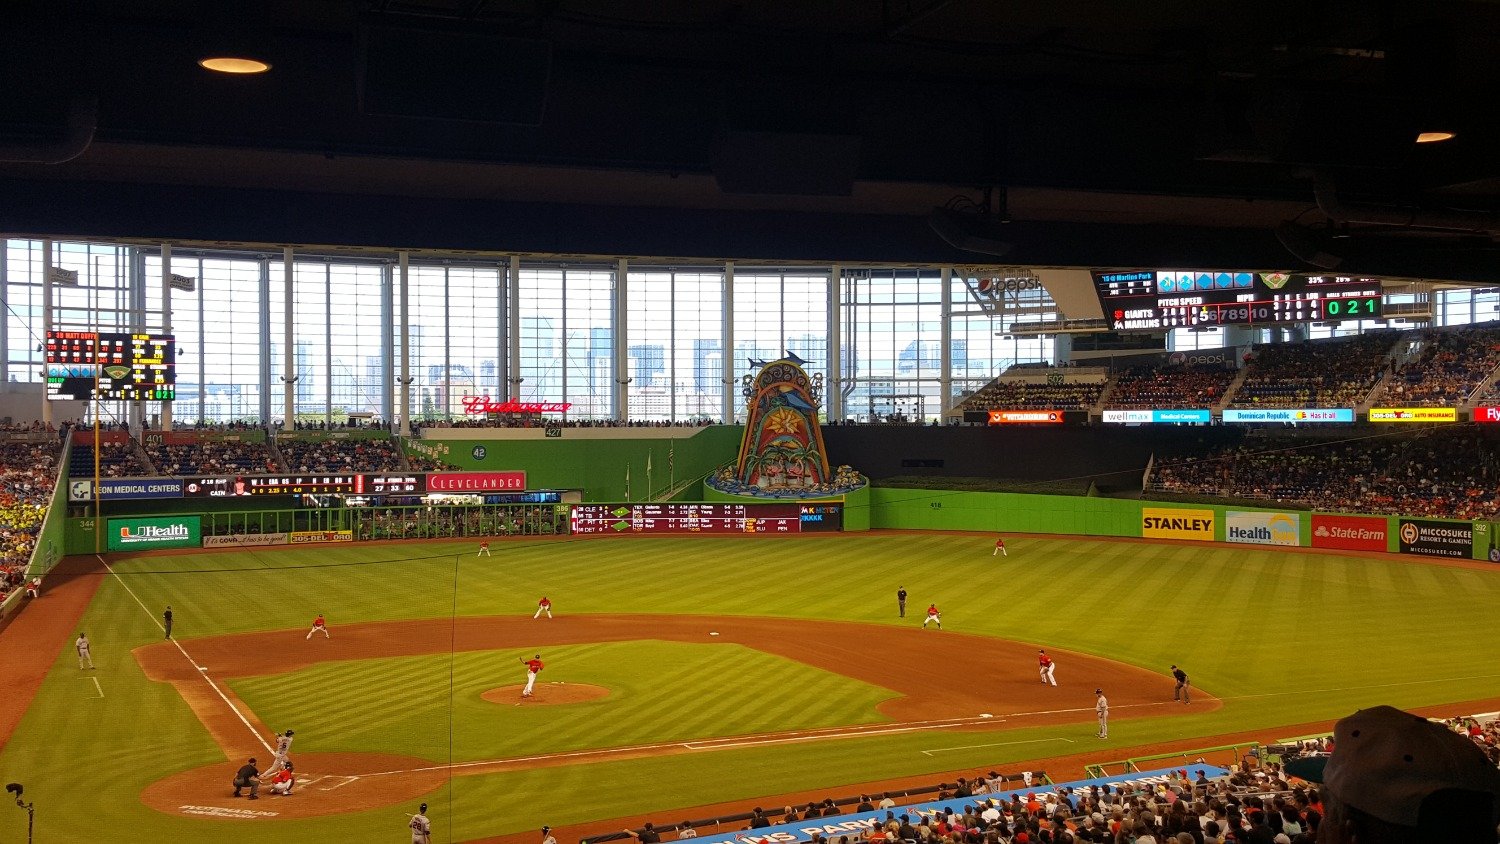 Review of Marlins Park